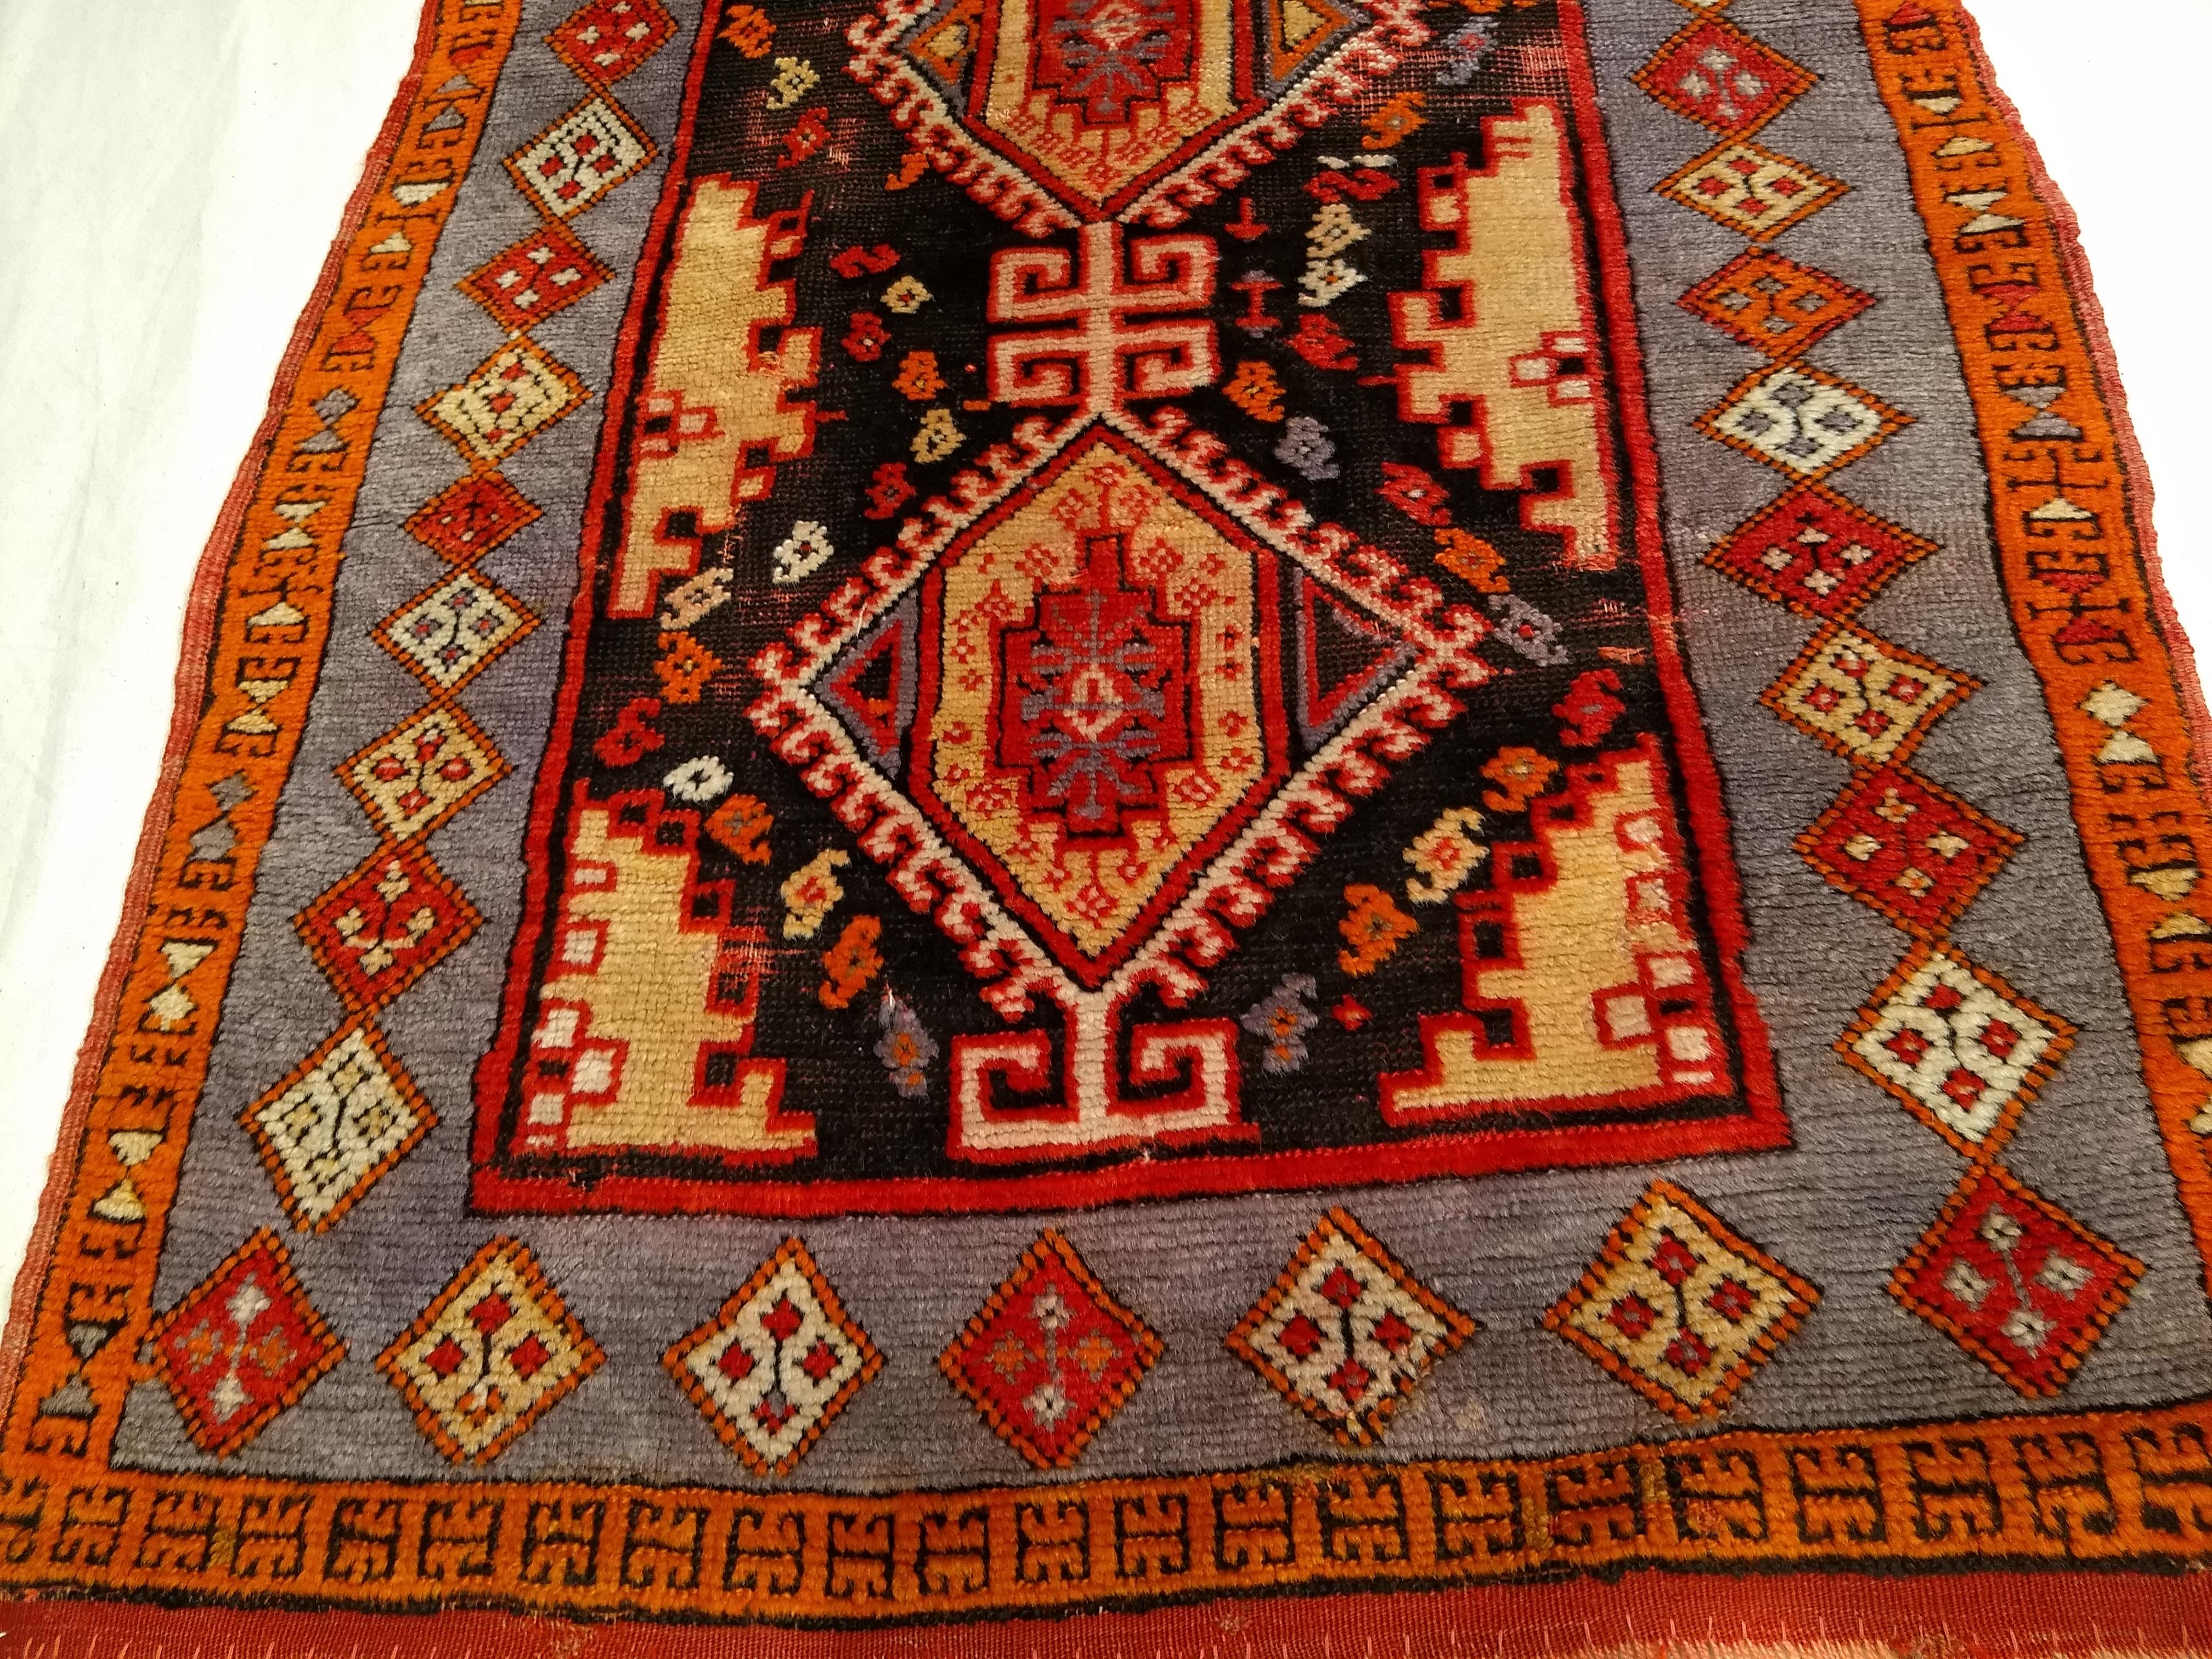 A beautiful Anatolian village rug from the early 1900s. The rug has a two-medallion design set on a navy blue color field. The medallions are red and pale yellow. The rug has a lavender color border with small medallions in pale yellow, orange, and